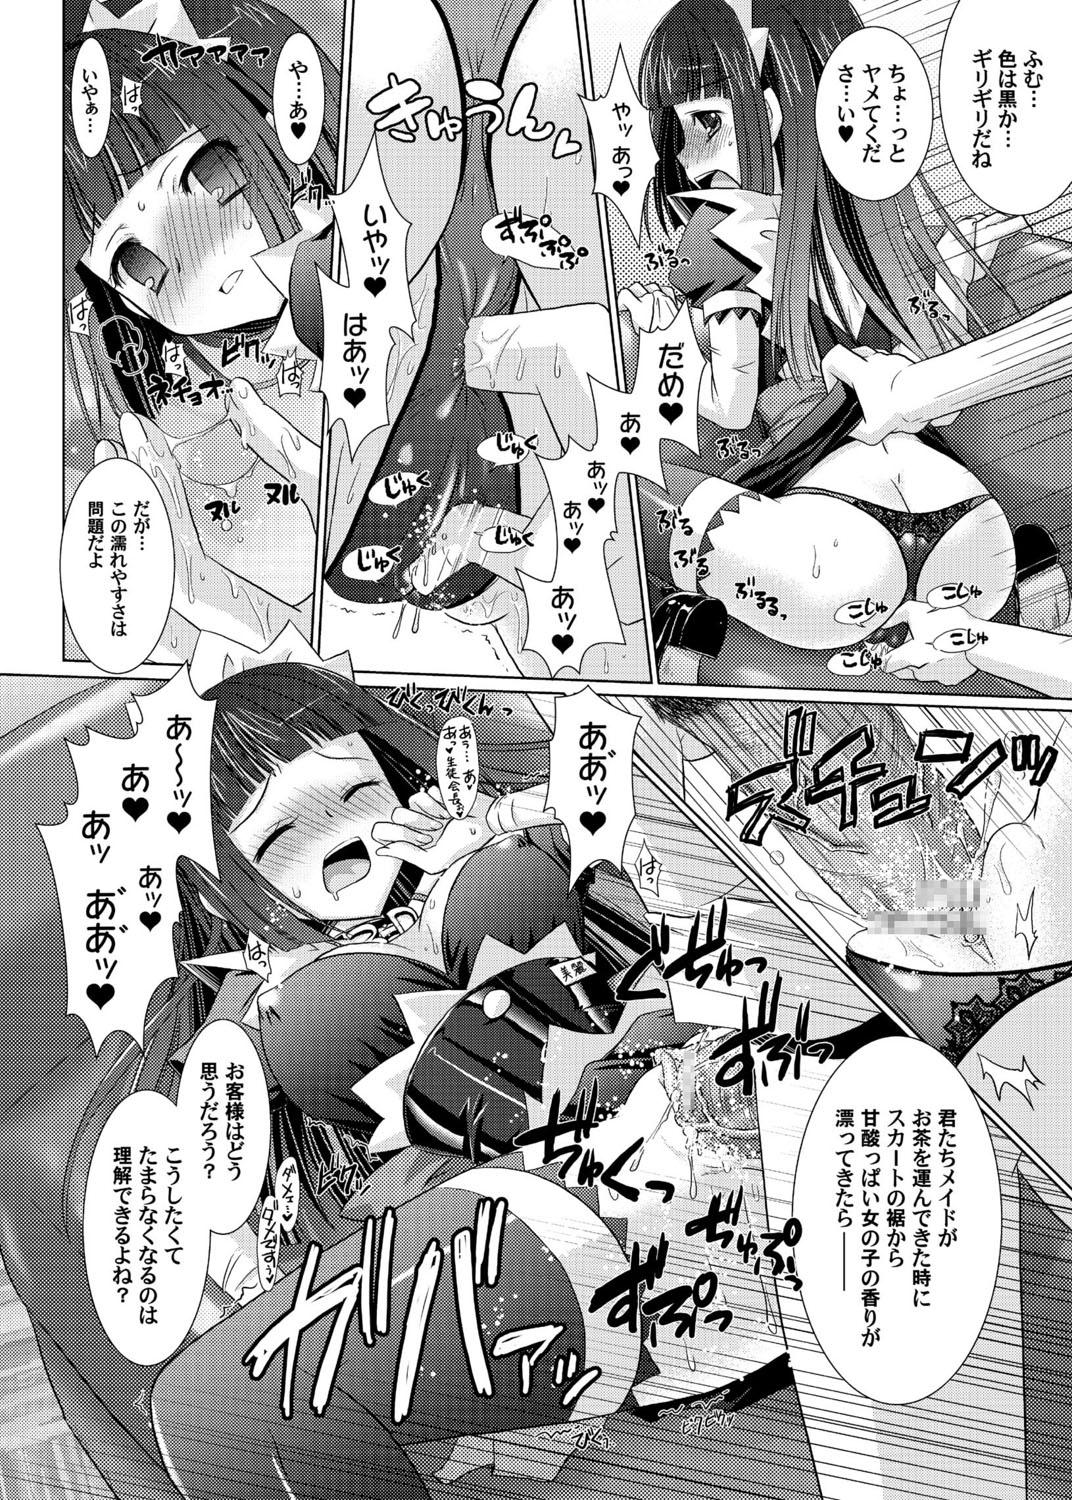 Denmark 3D Maid Cafe Point Of View - Page 11